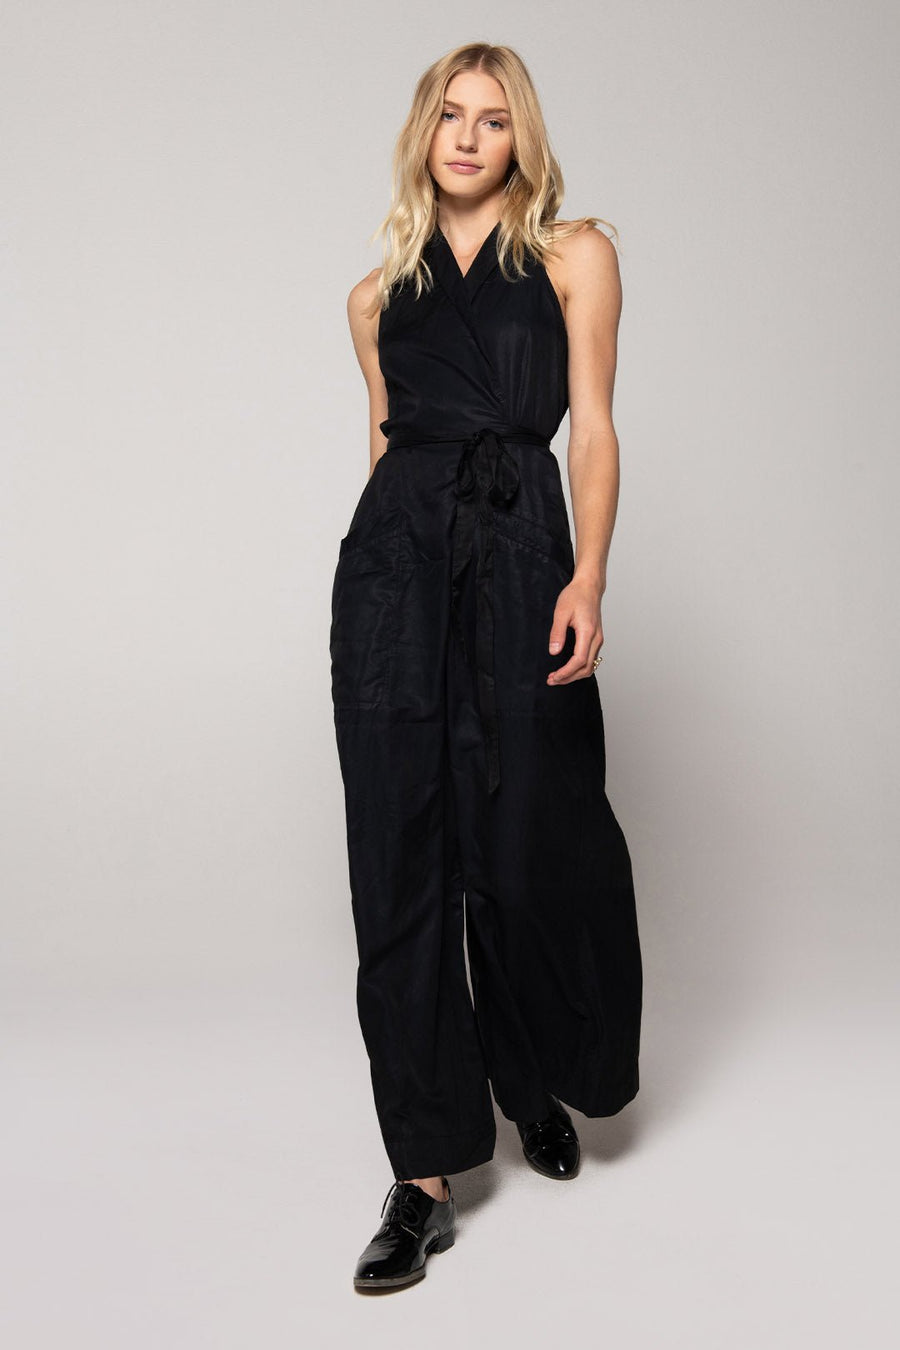 LINCOLN SLEEVELESS JUMPSUIT, BLACK - Burning Torch Online Boutique